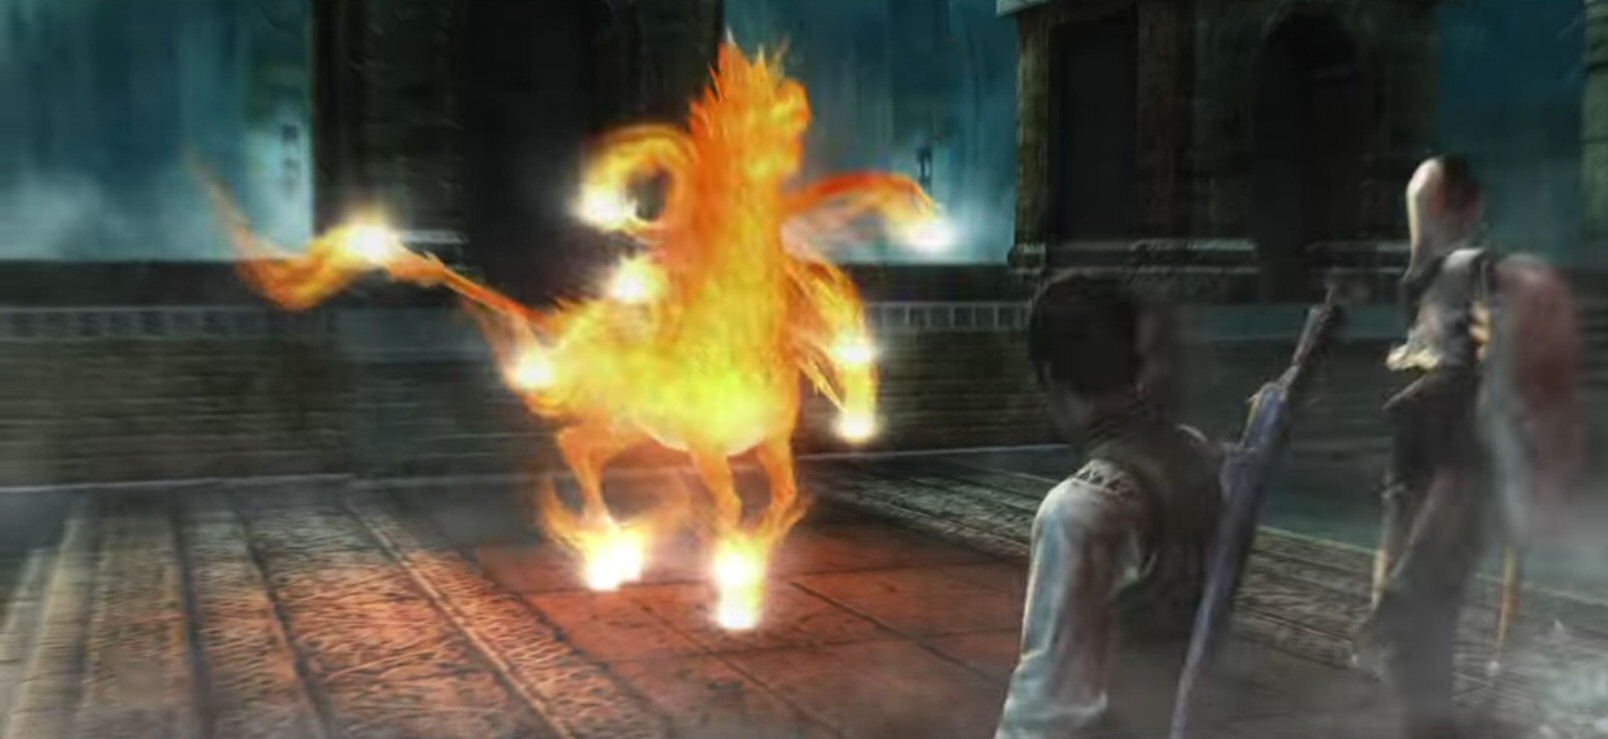 Ah, the classic 'fire elemental in the shape of a tentacle horse that lives in a sewer' trope.